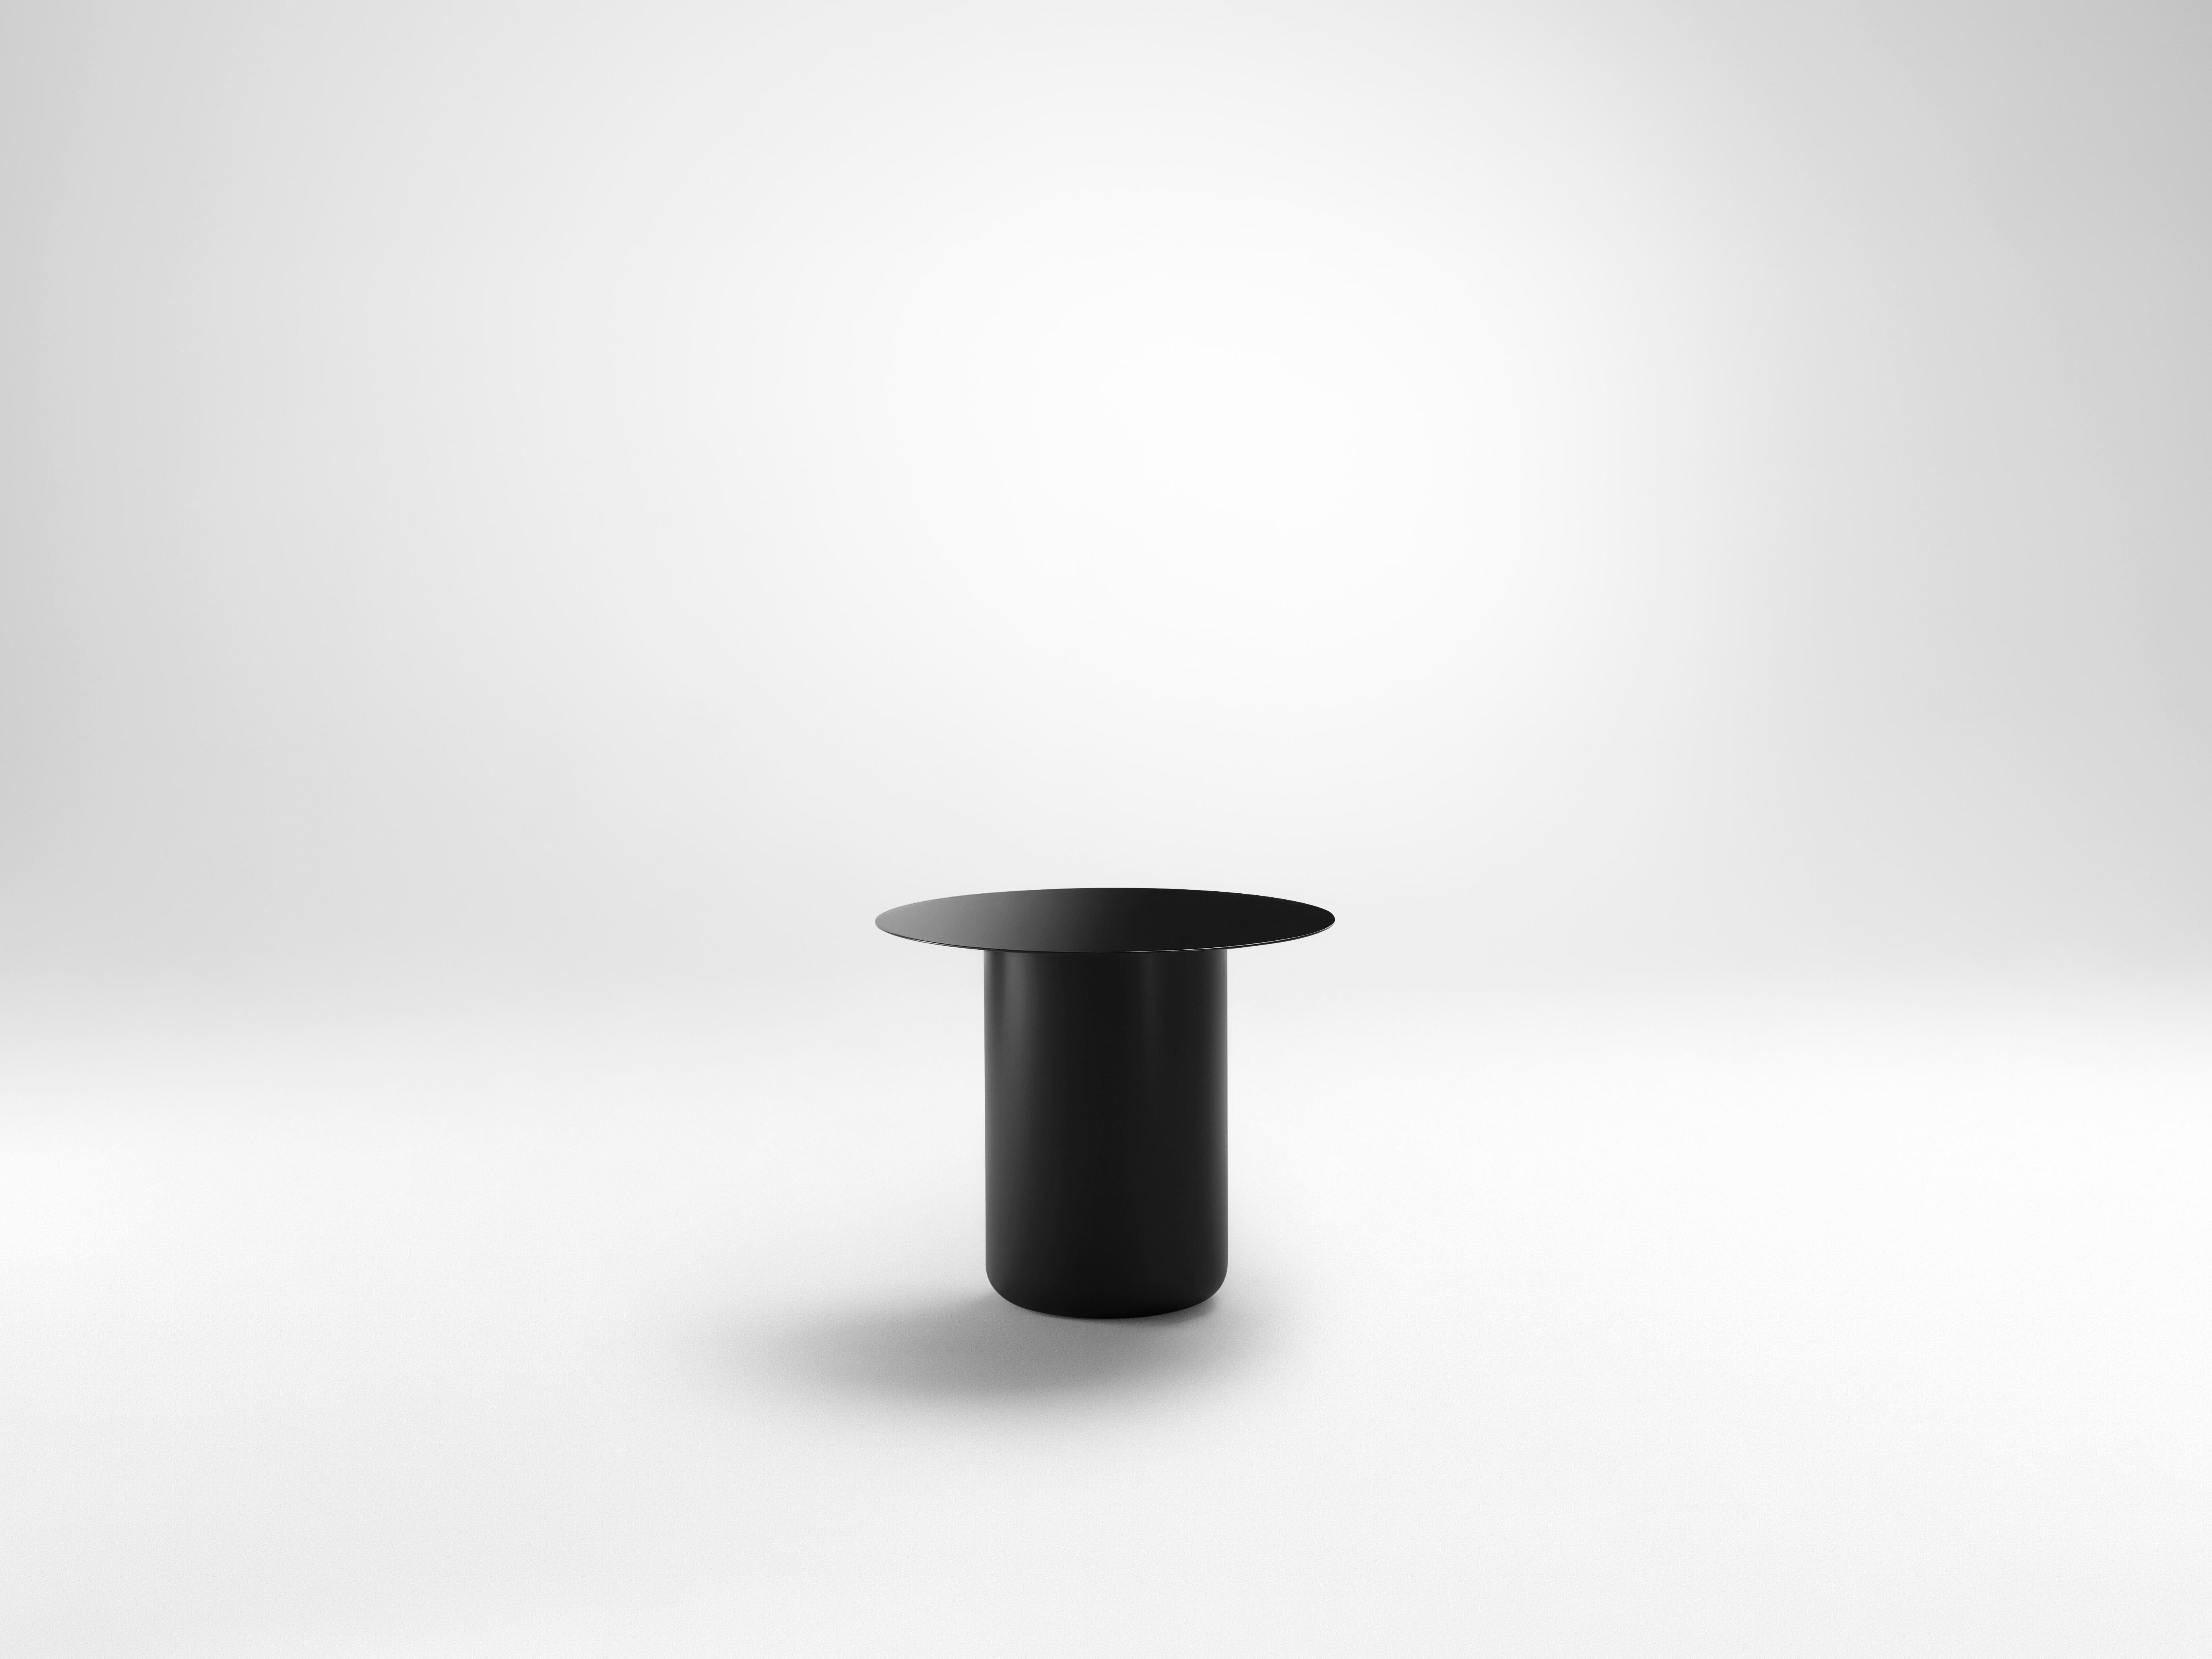 Black Table 01 by Coco Flip
Dimensions: D 48 x W 48 x H 32 / 36 / 40 / 42 cm
Materials: Mild steel, powder-coated with zinc undercoat. 
Weight: 12kg

Coco Flip is a Melbourne based furniture and lighting design studio, run by us, Kate Stokes and